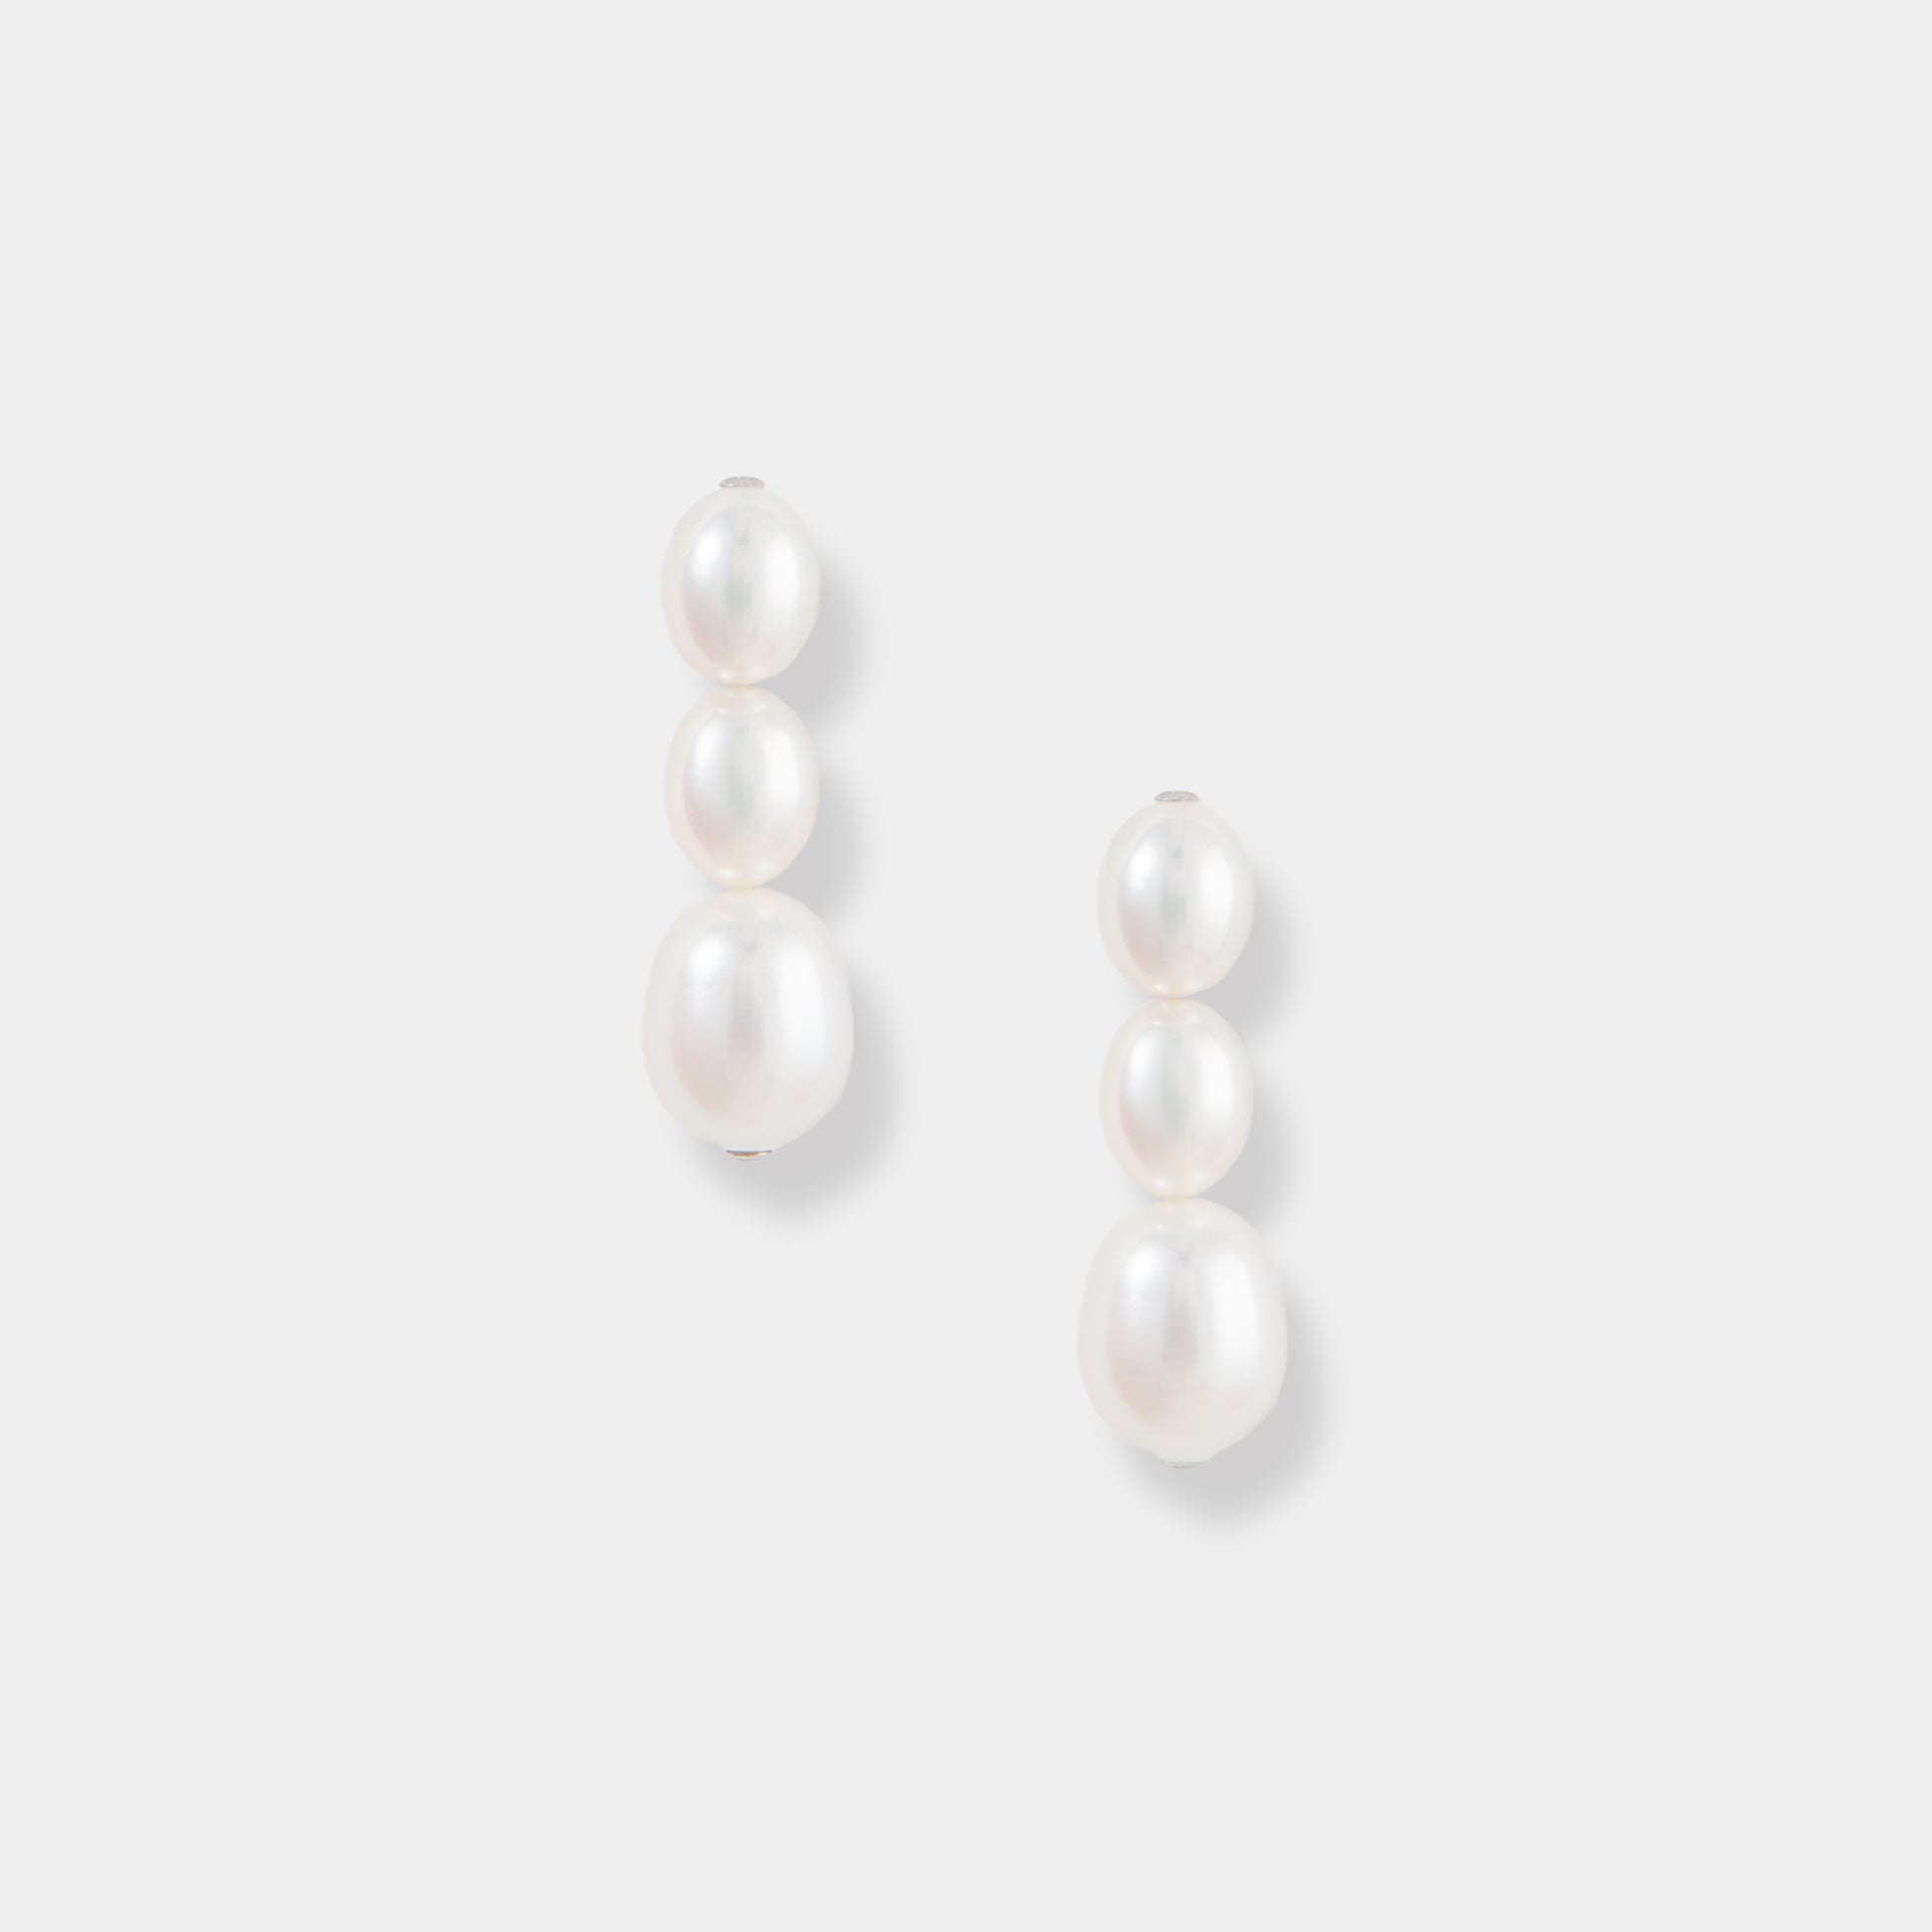 Elevate your style with these stunning oval pearl drop earrings against a clean white backdrop. A timeless accessory.